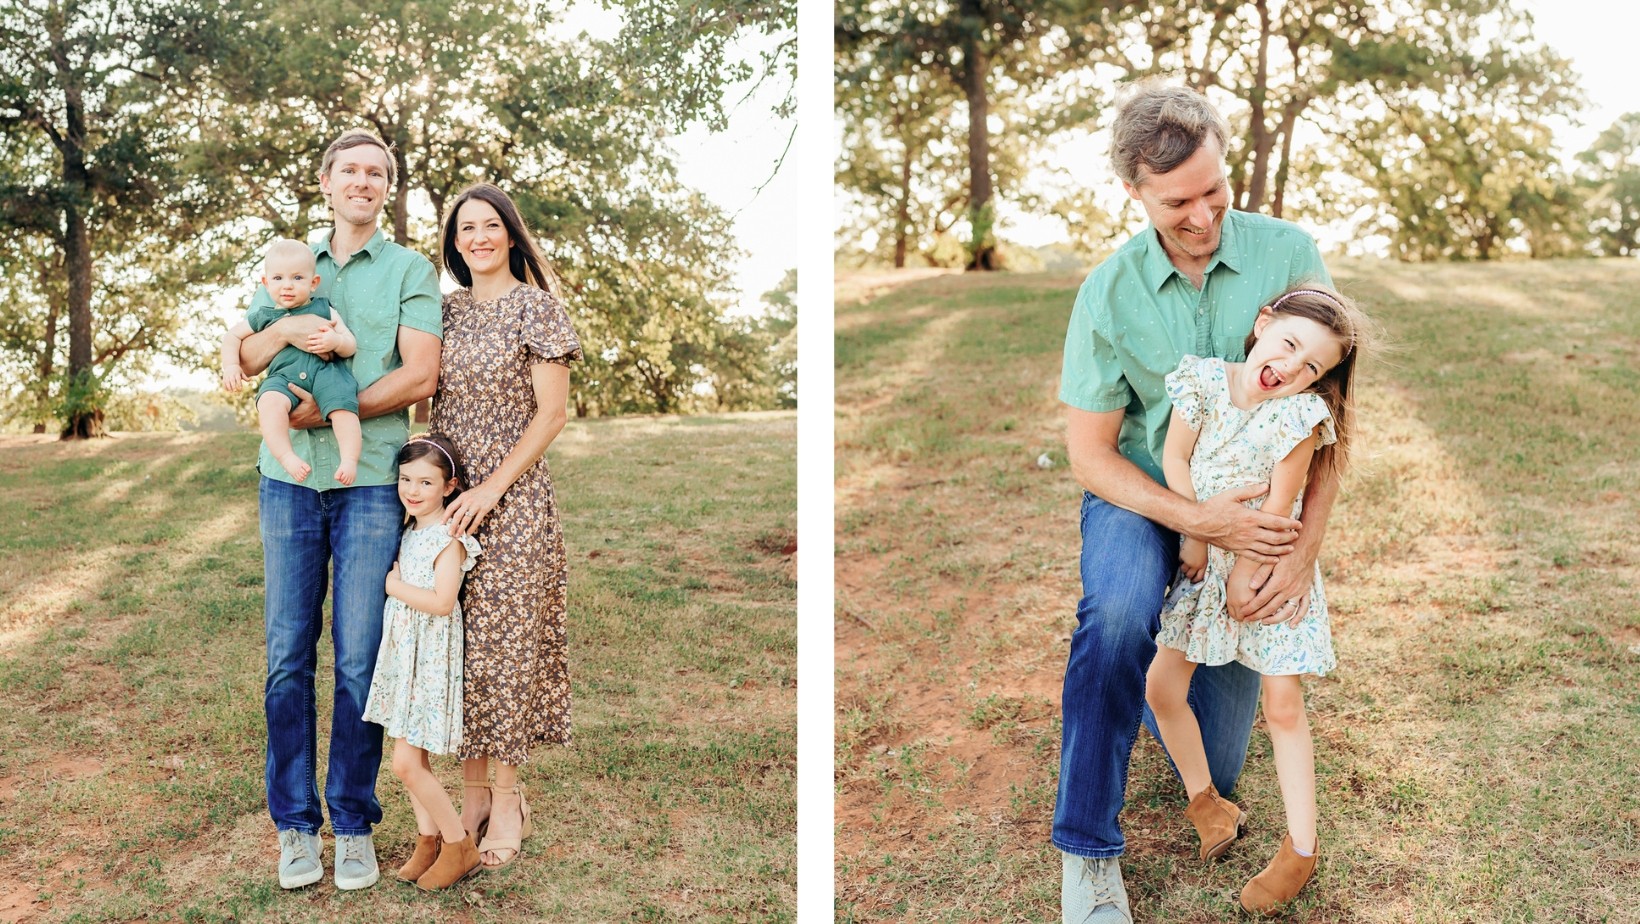 Family during photo session in Edmond, OK.